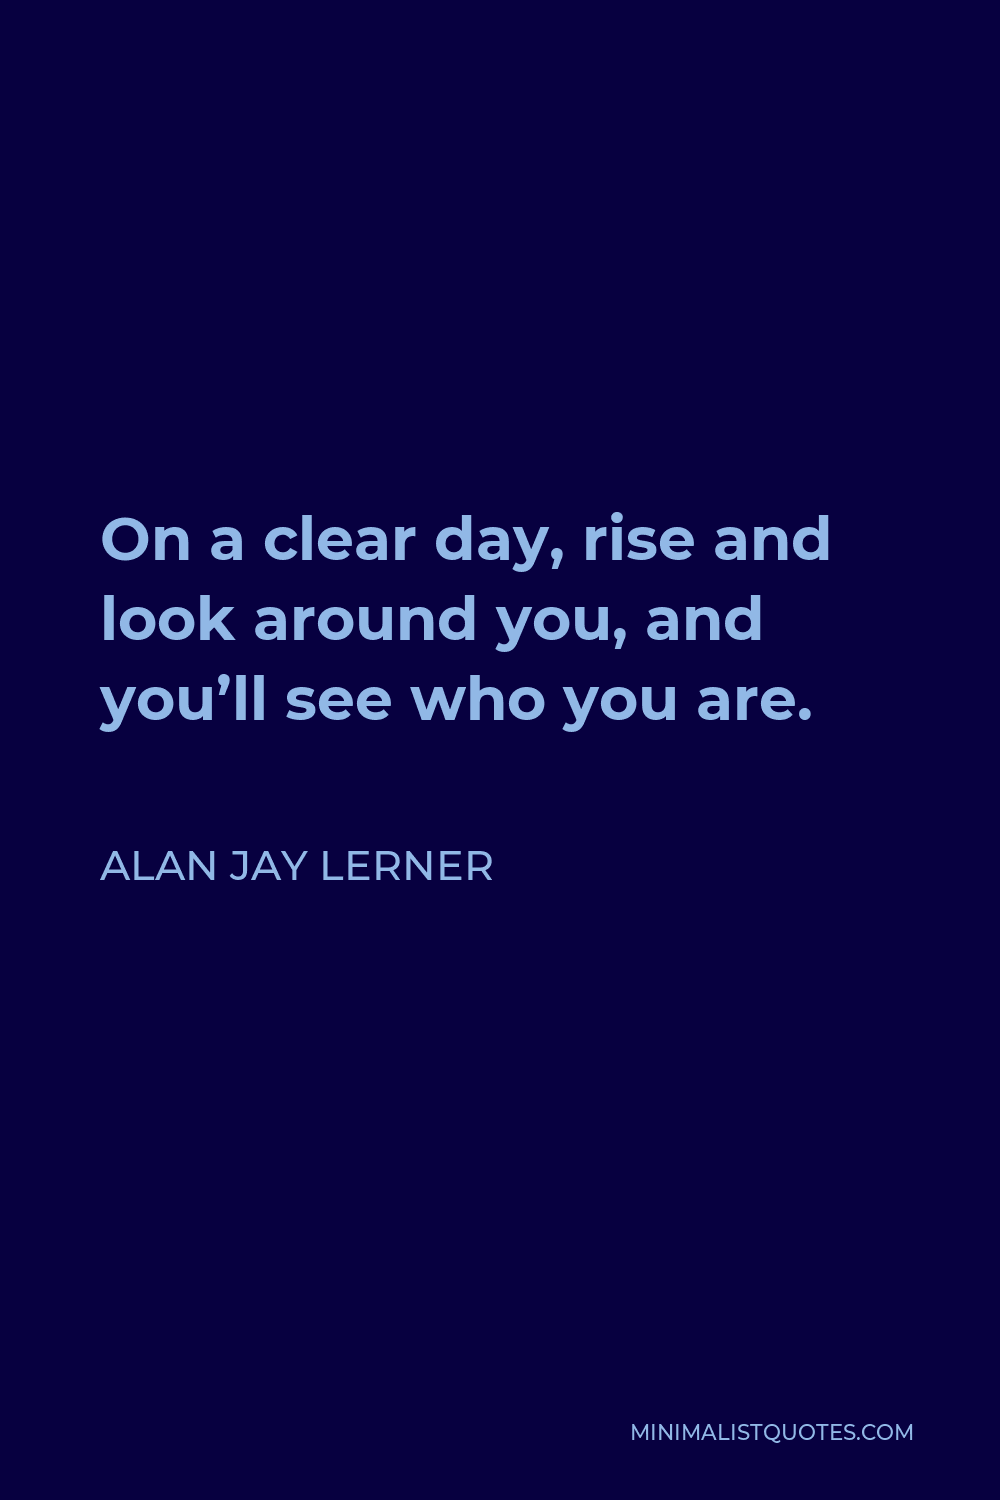 Alan Jay Lerner Quote - On a clear day, rise and look around you, and you’ll see who you are.